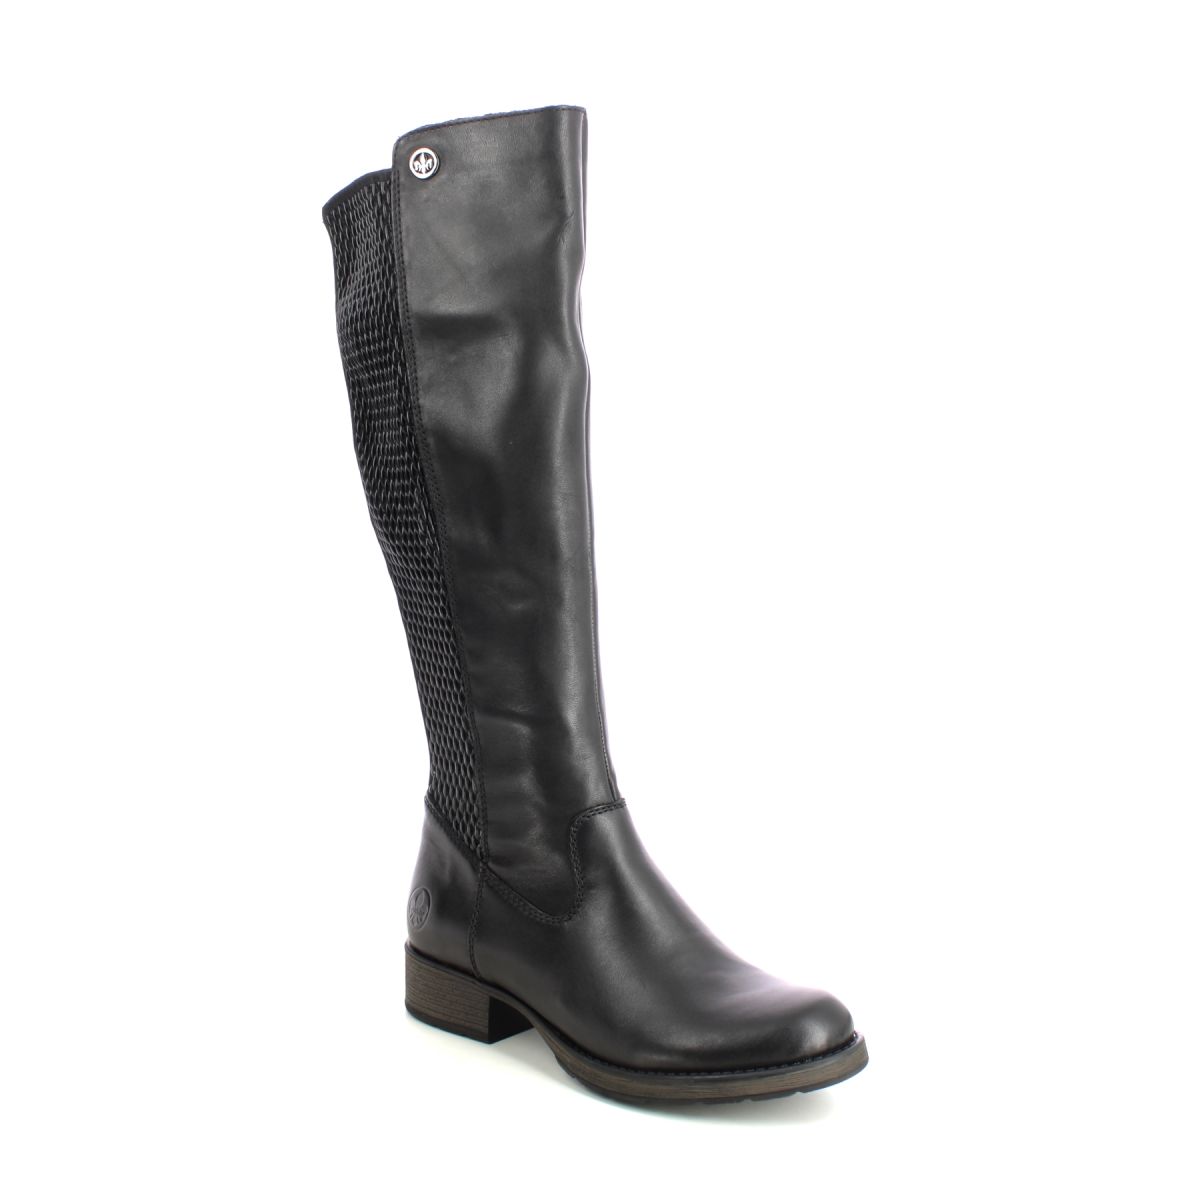 Rieker Indafit Stretch Black Leather Womens Knee-High Boots Z9591-00 In Size 40 In Plain Black Leather